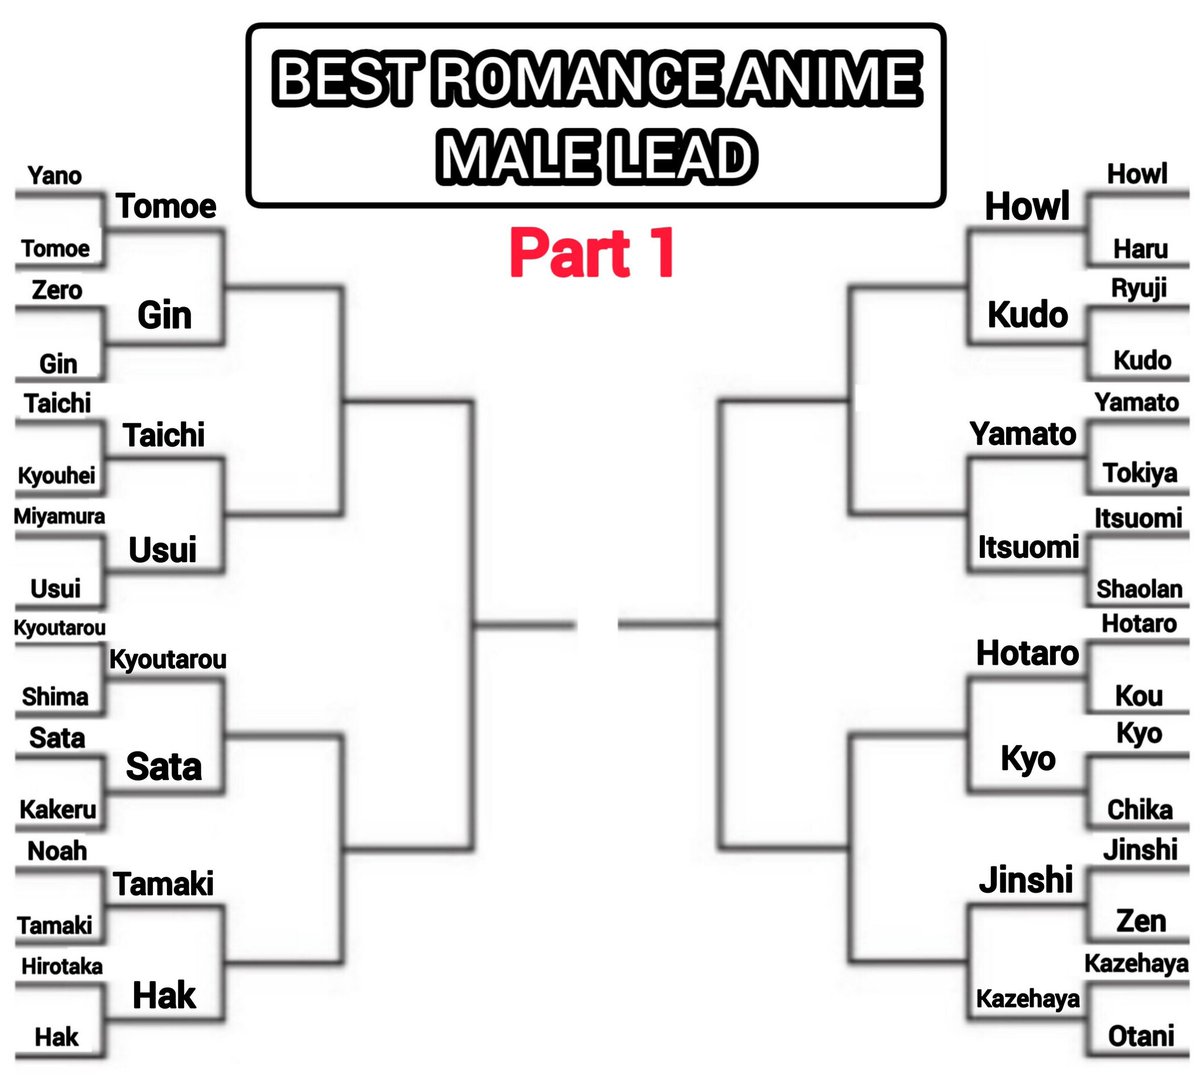 BEST ROMANCE ANIME MALE LEAD ‼️ (Part 2)

Make sure to vote and have other people vote with you to get your favorite character to the next ROUND !

#shojo #shojoanime #romanceanime #animeboy #animecouple